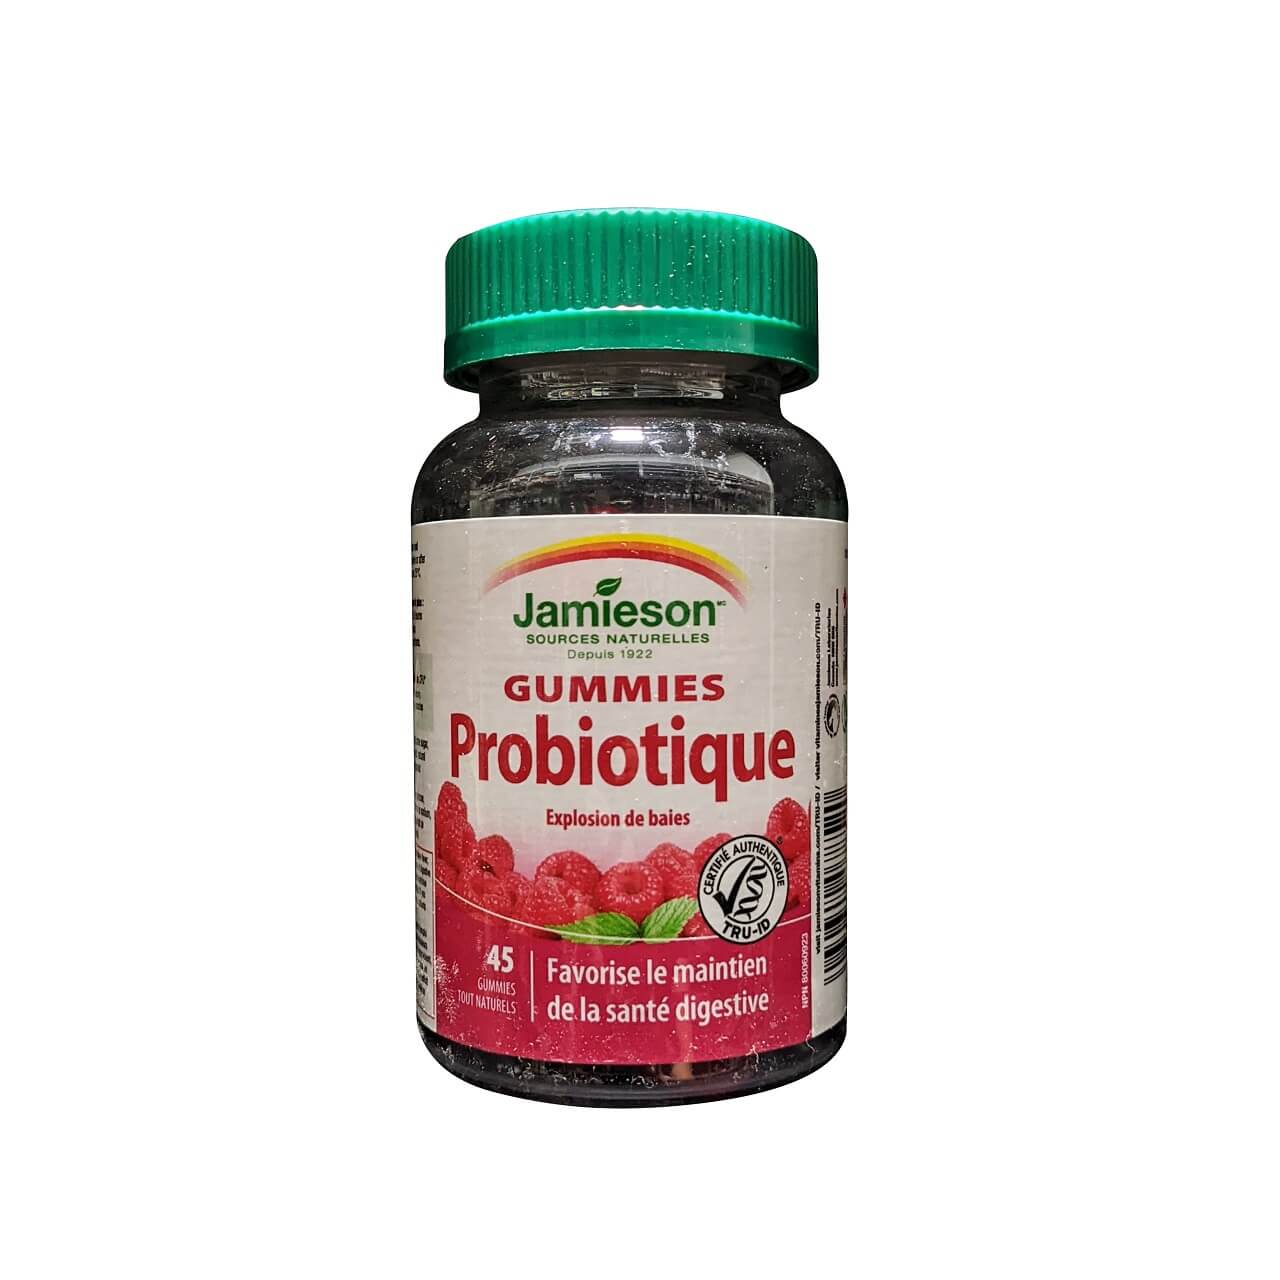 Product label for Jamieson Probiotic Gummies Berry Blast (45 gummies) in French